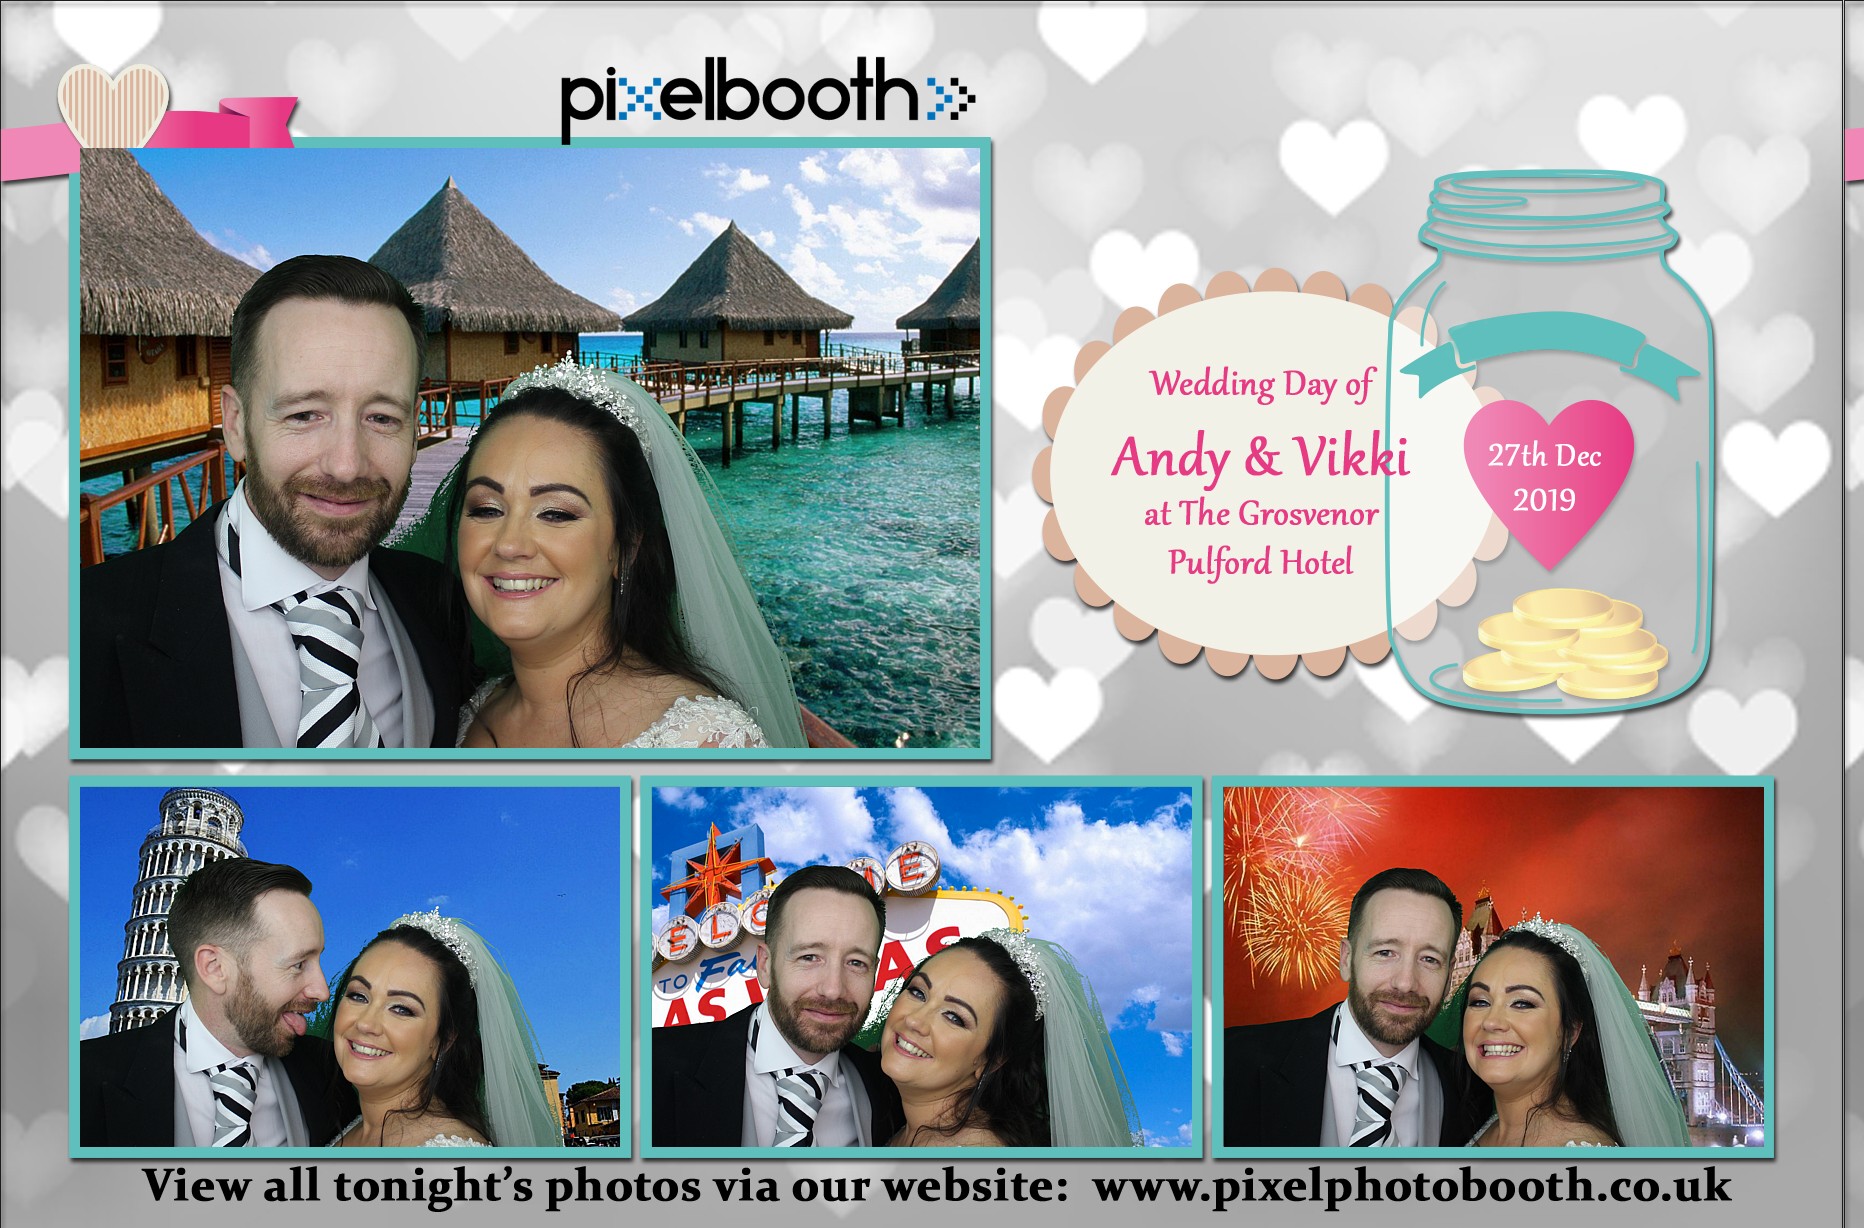 27th Dec 2019: Andy and Vikki's Wedding at The Grosvenor Pulford Hotel